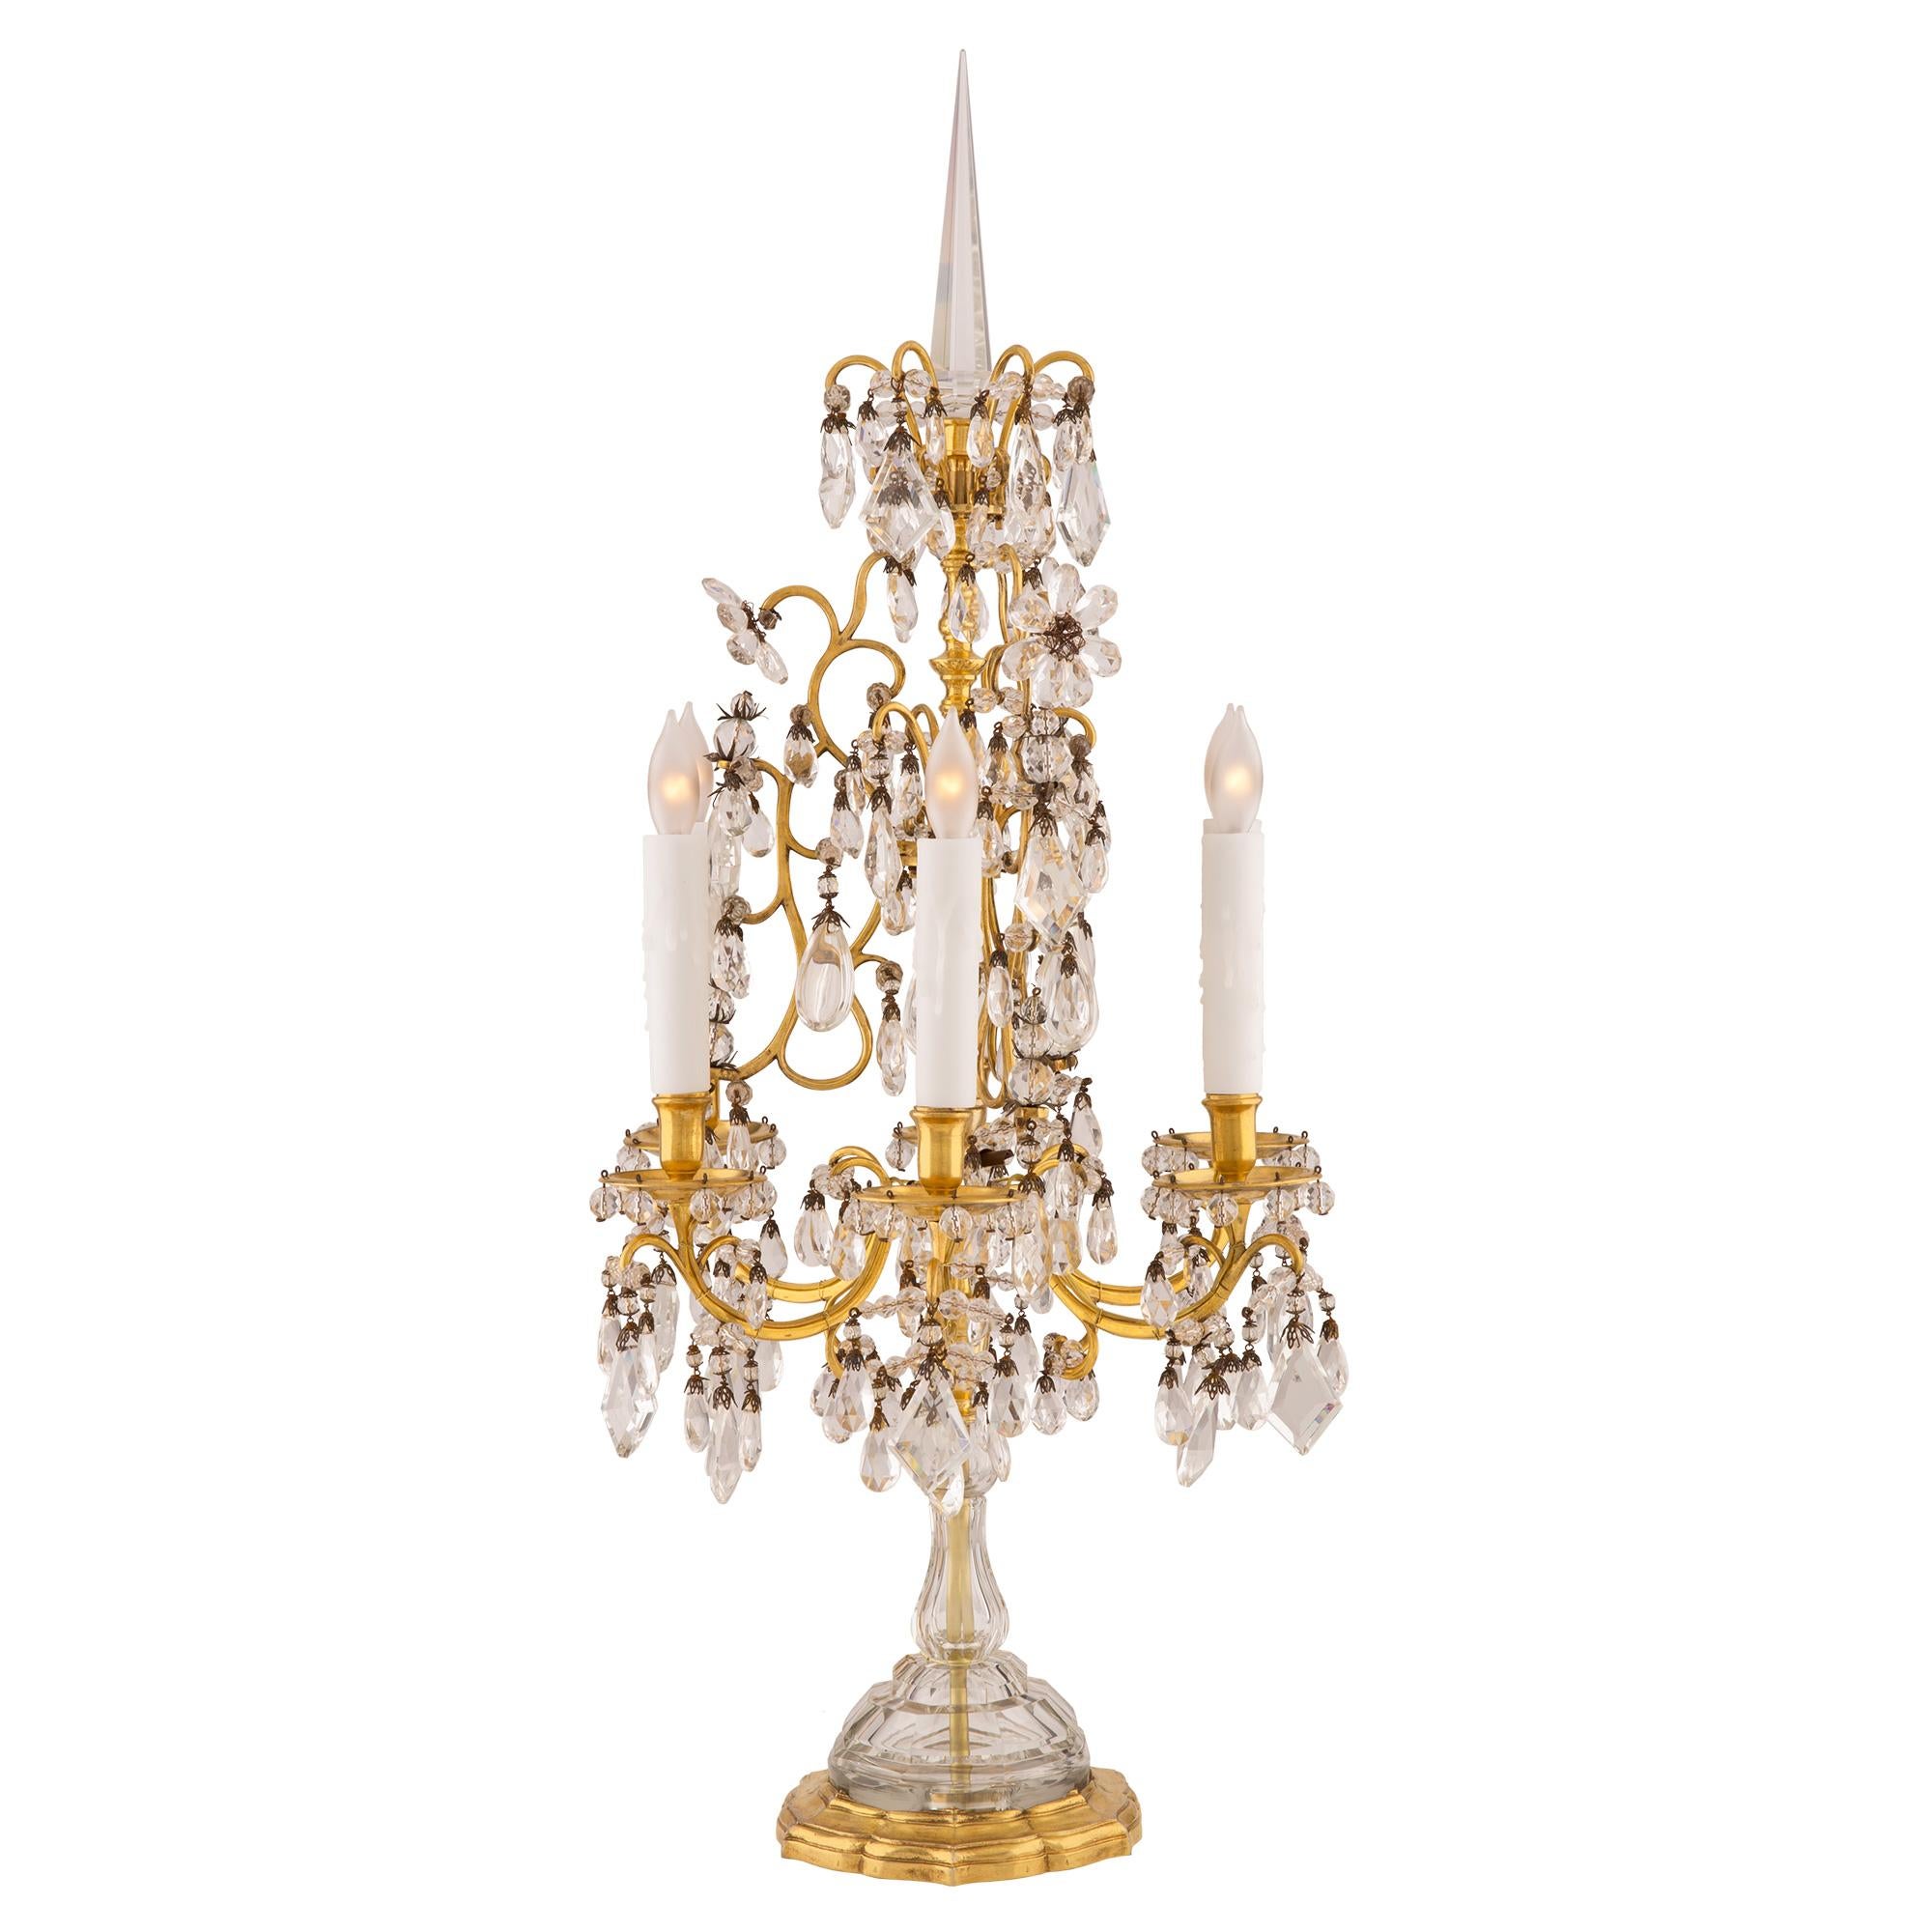 A remarkable and very high quality pair of French 19th century Louis XVI st. ormolu and Baccarat crystal Girandole lamps. Each Girandole is raised by a lovely scalloped shaped ormolu support with a Fine mottled design. The Baccarat crystal socle